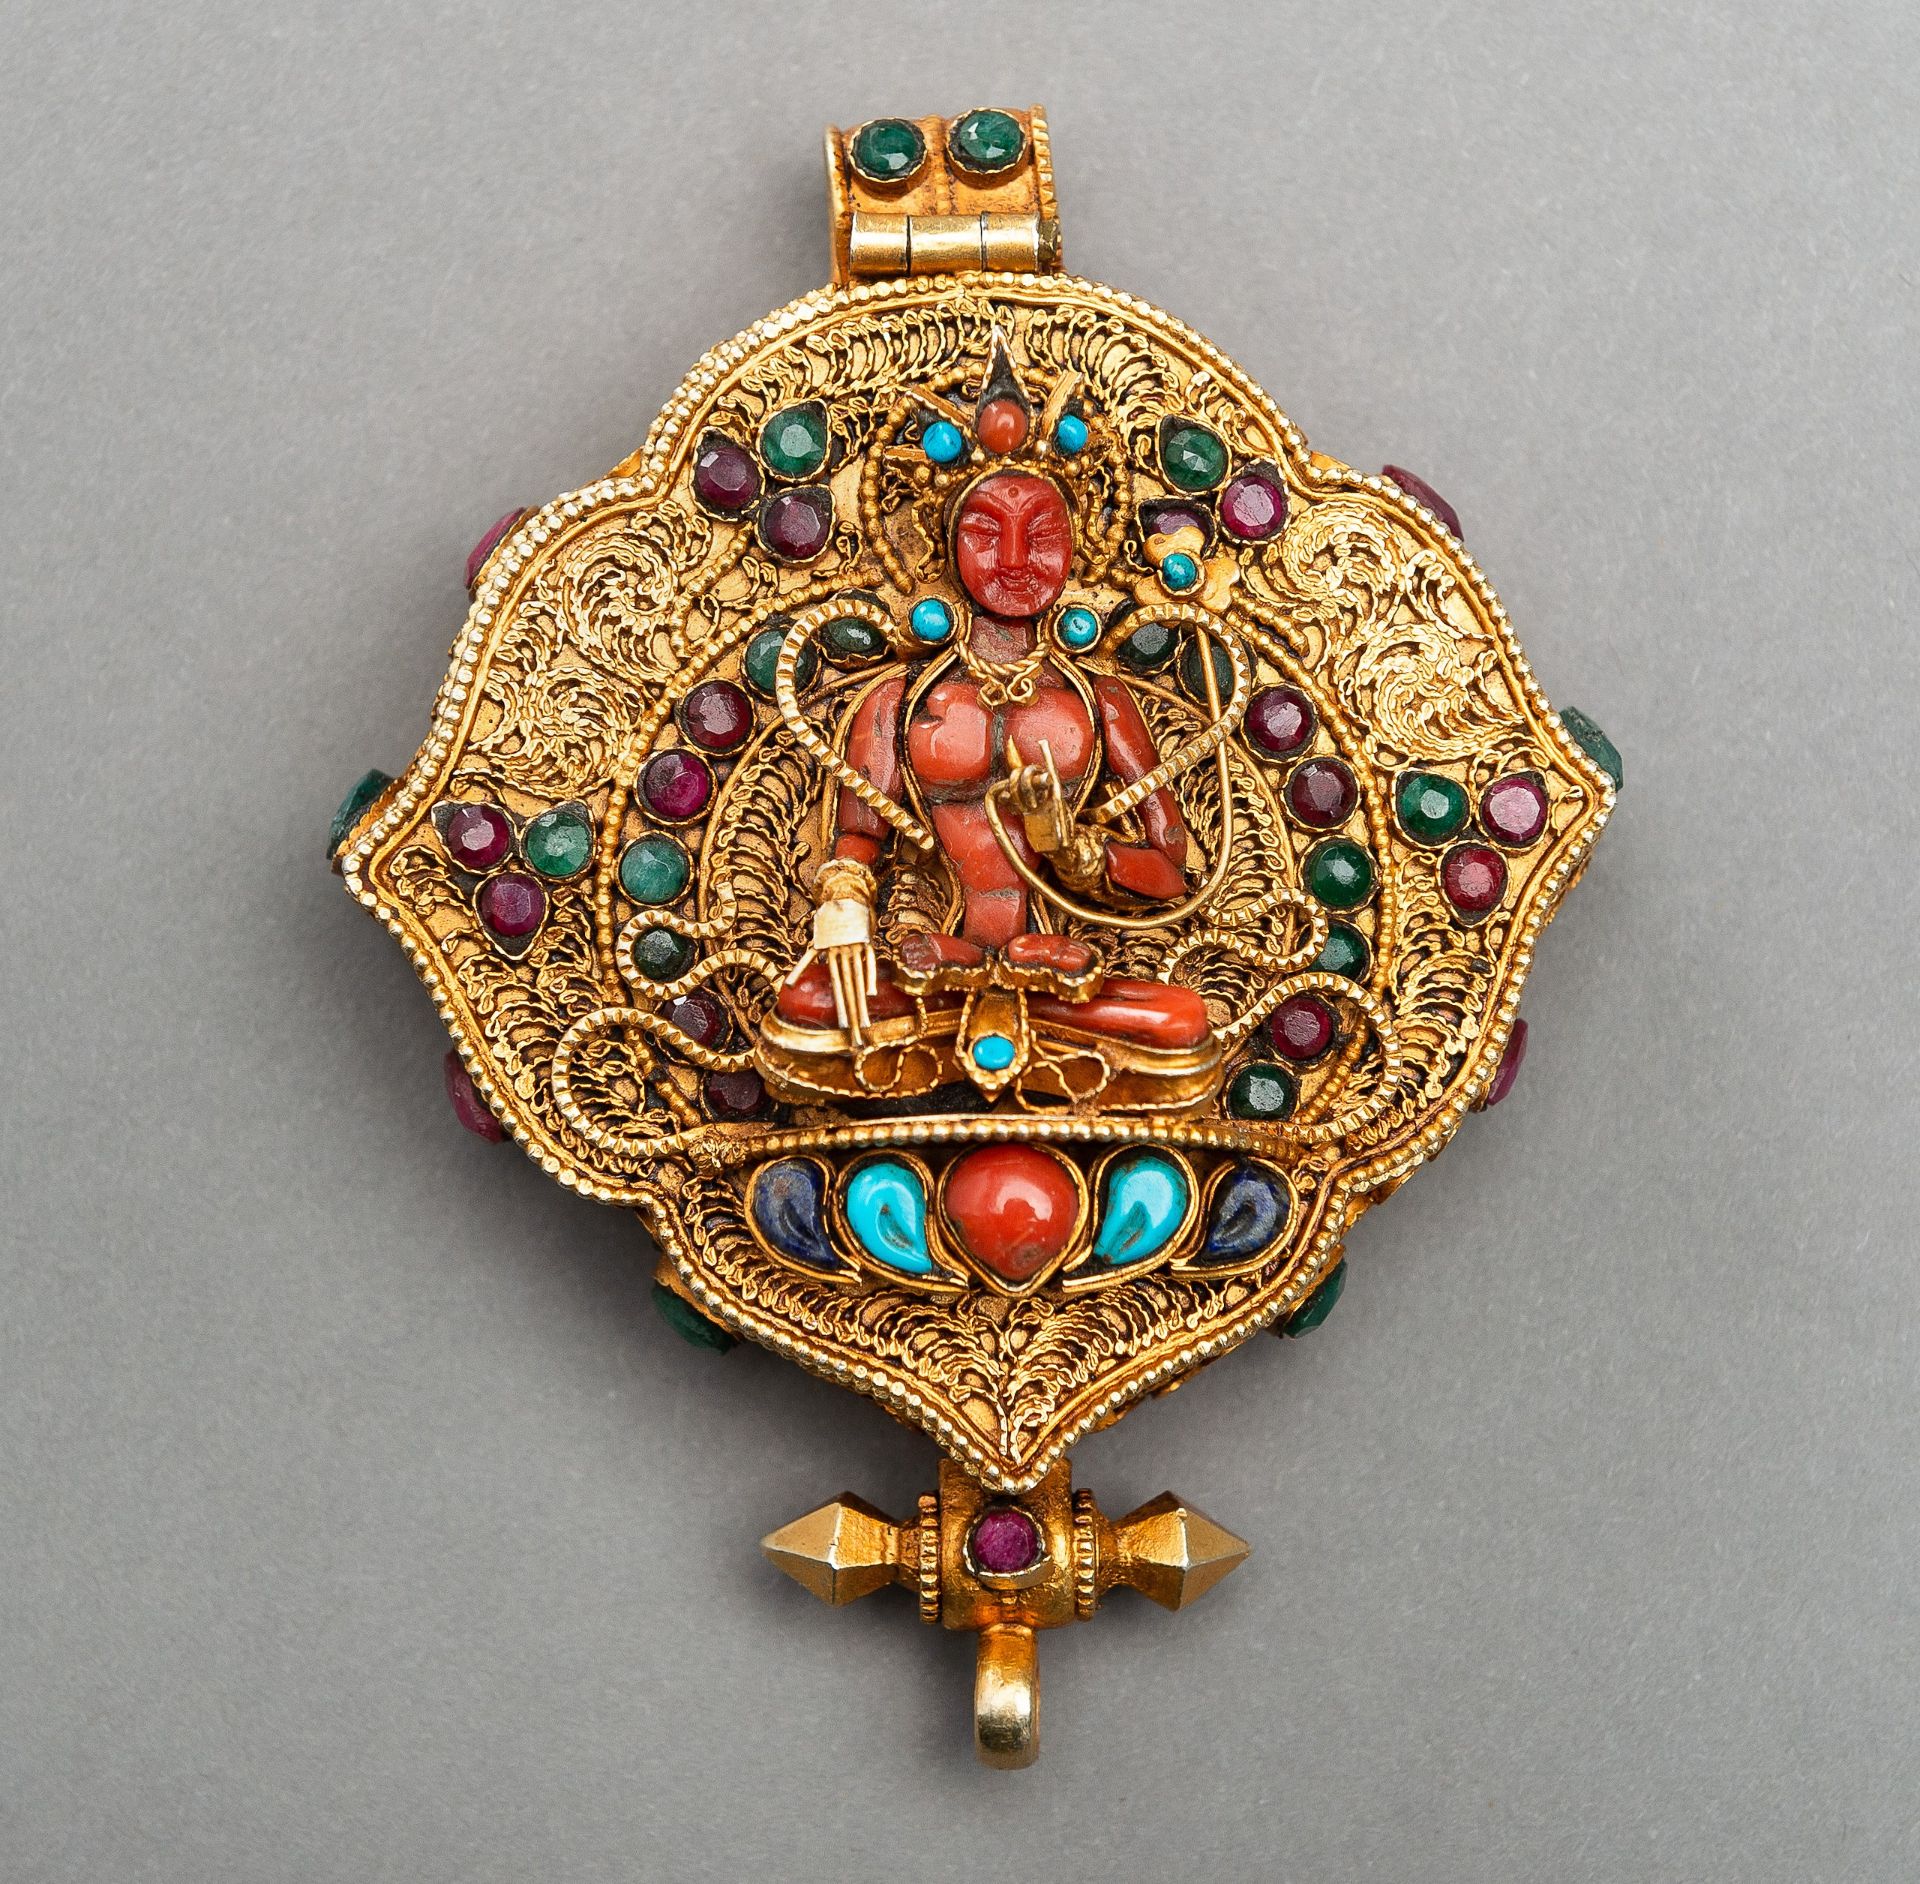 AN INLAID AND GILT AMULET-CONTAINER GAU WITH VAJRASATTVA